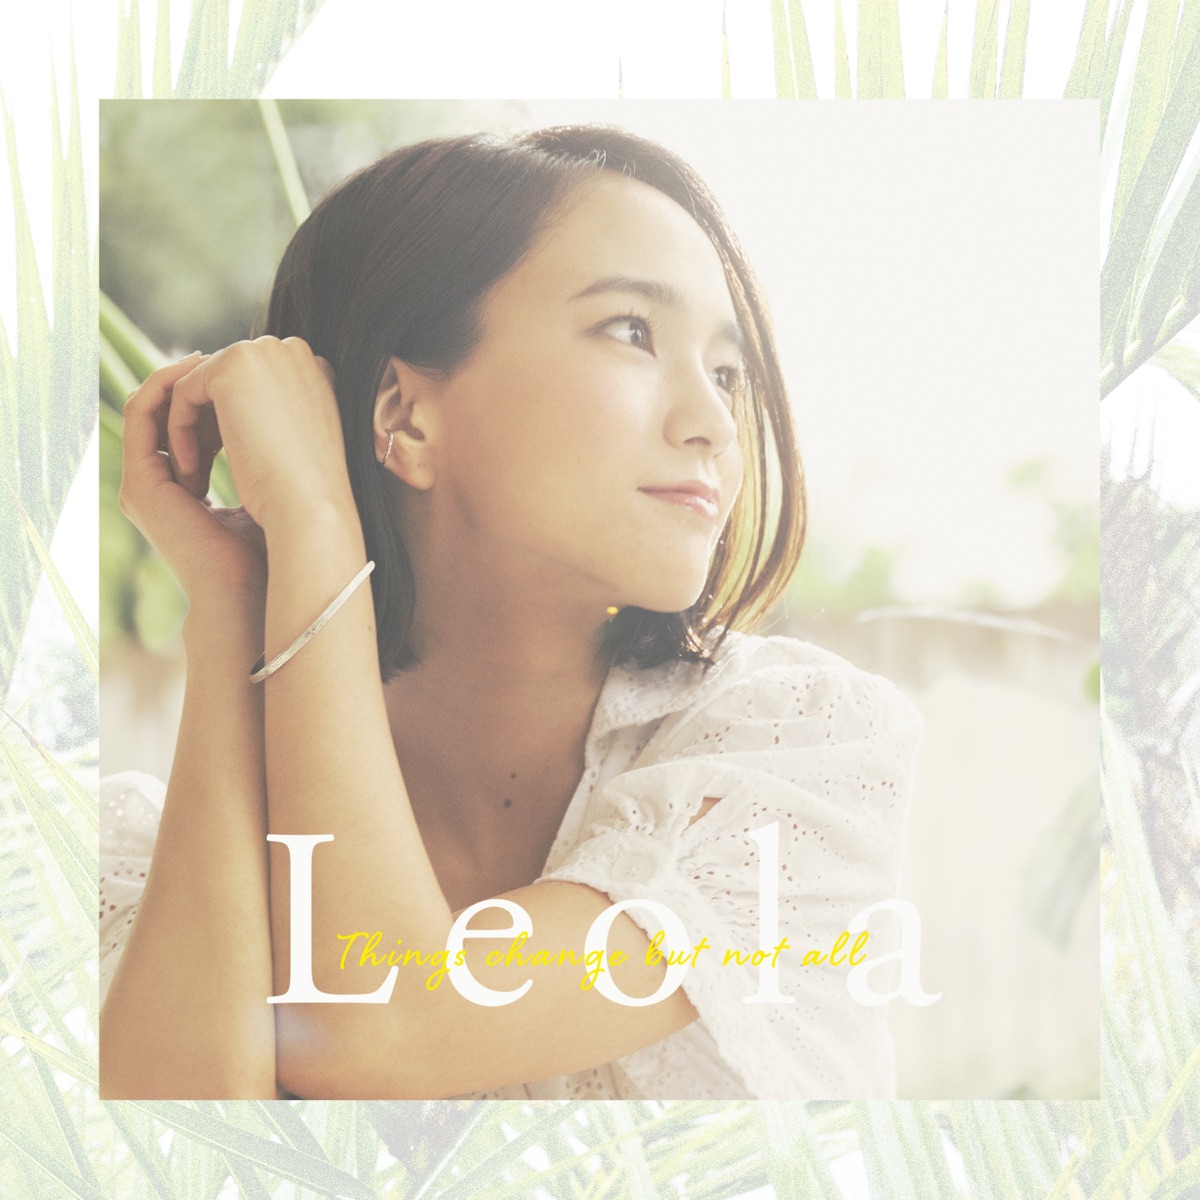 『Leola - After the Rain feat. FUKI 歌詞』収録の『Things change but not all』ジャケット